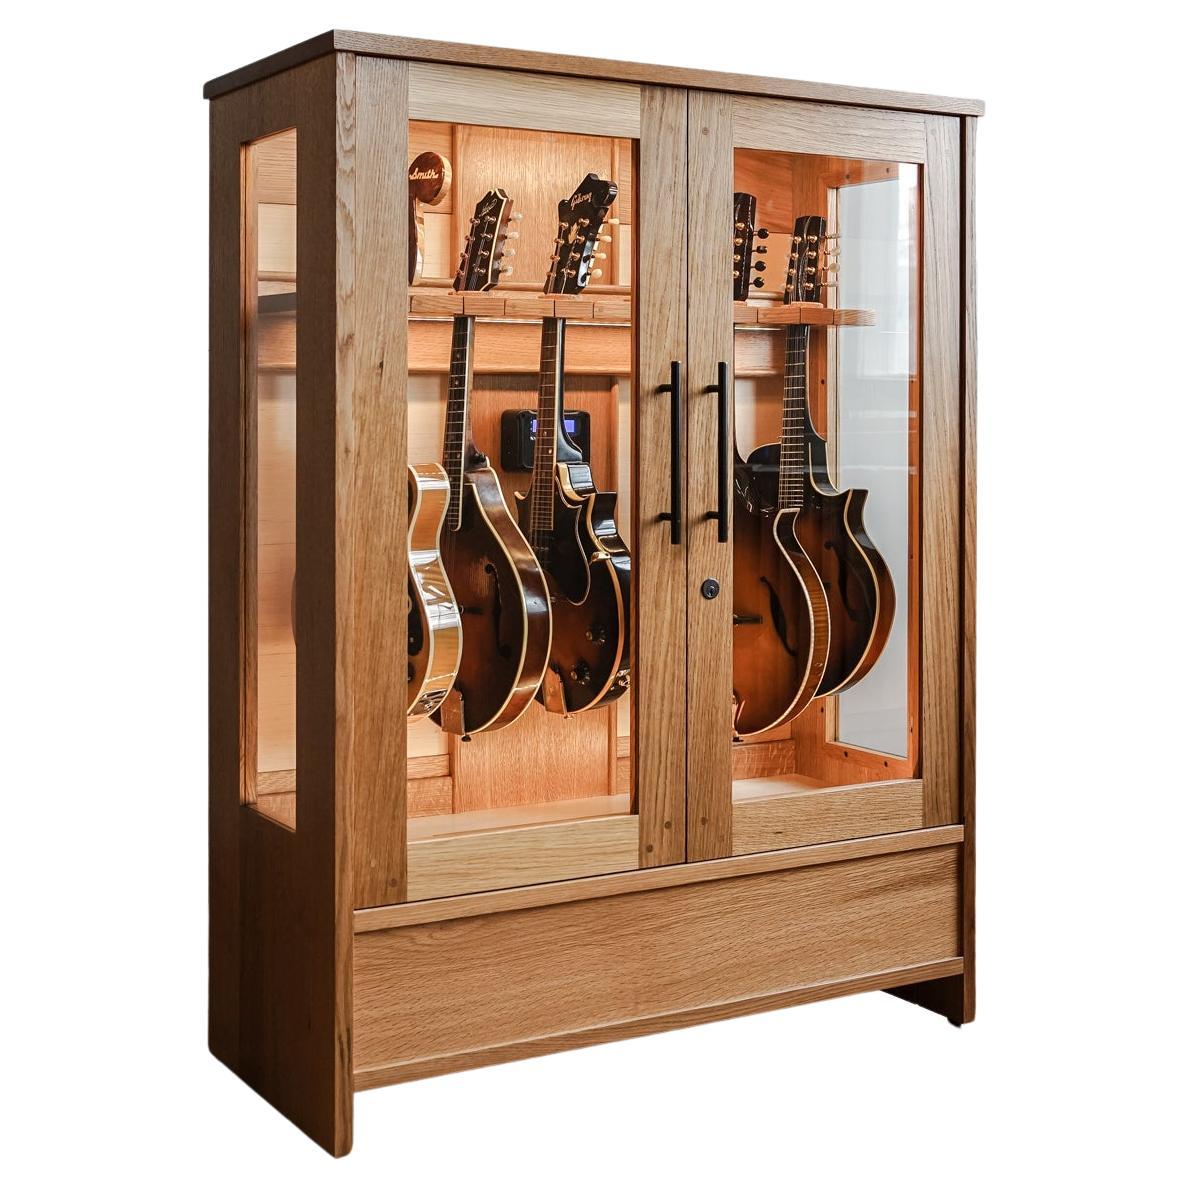 Mandolin & Violin Display Case with Built-In Humidifier For Sale